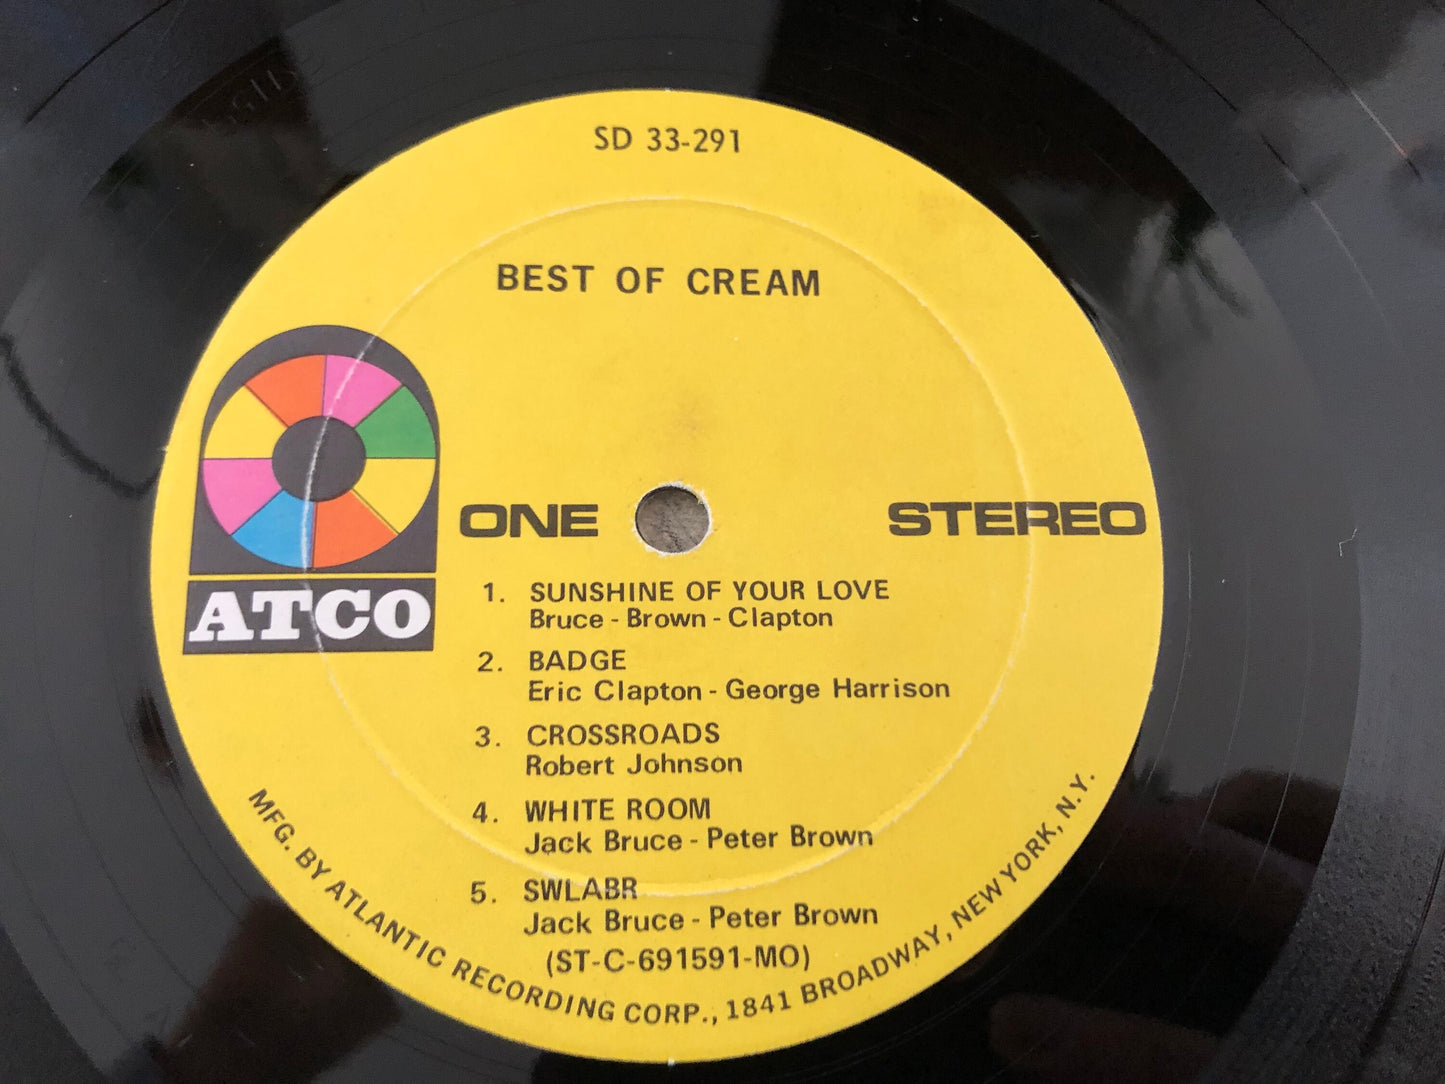 Cream Best of Cream 1969 Atco SD 33-291 Monarch Pressing Vintage Vinyl Records 1960's Psychedelic Records Eric Clapton, Ginger Baker